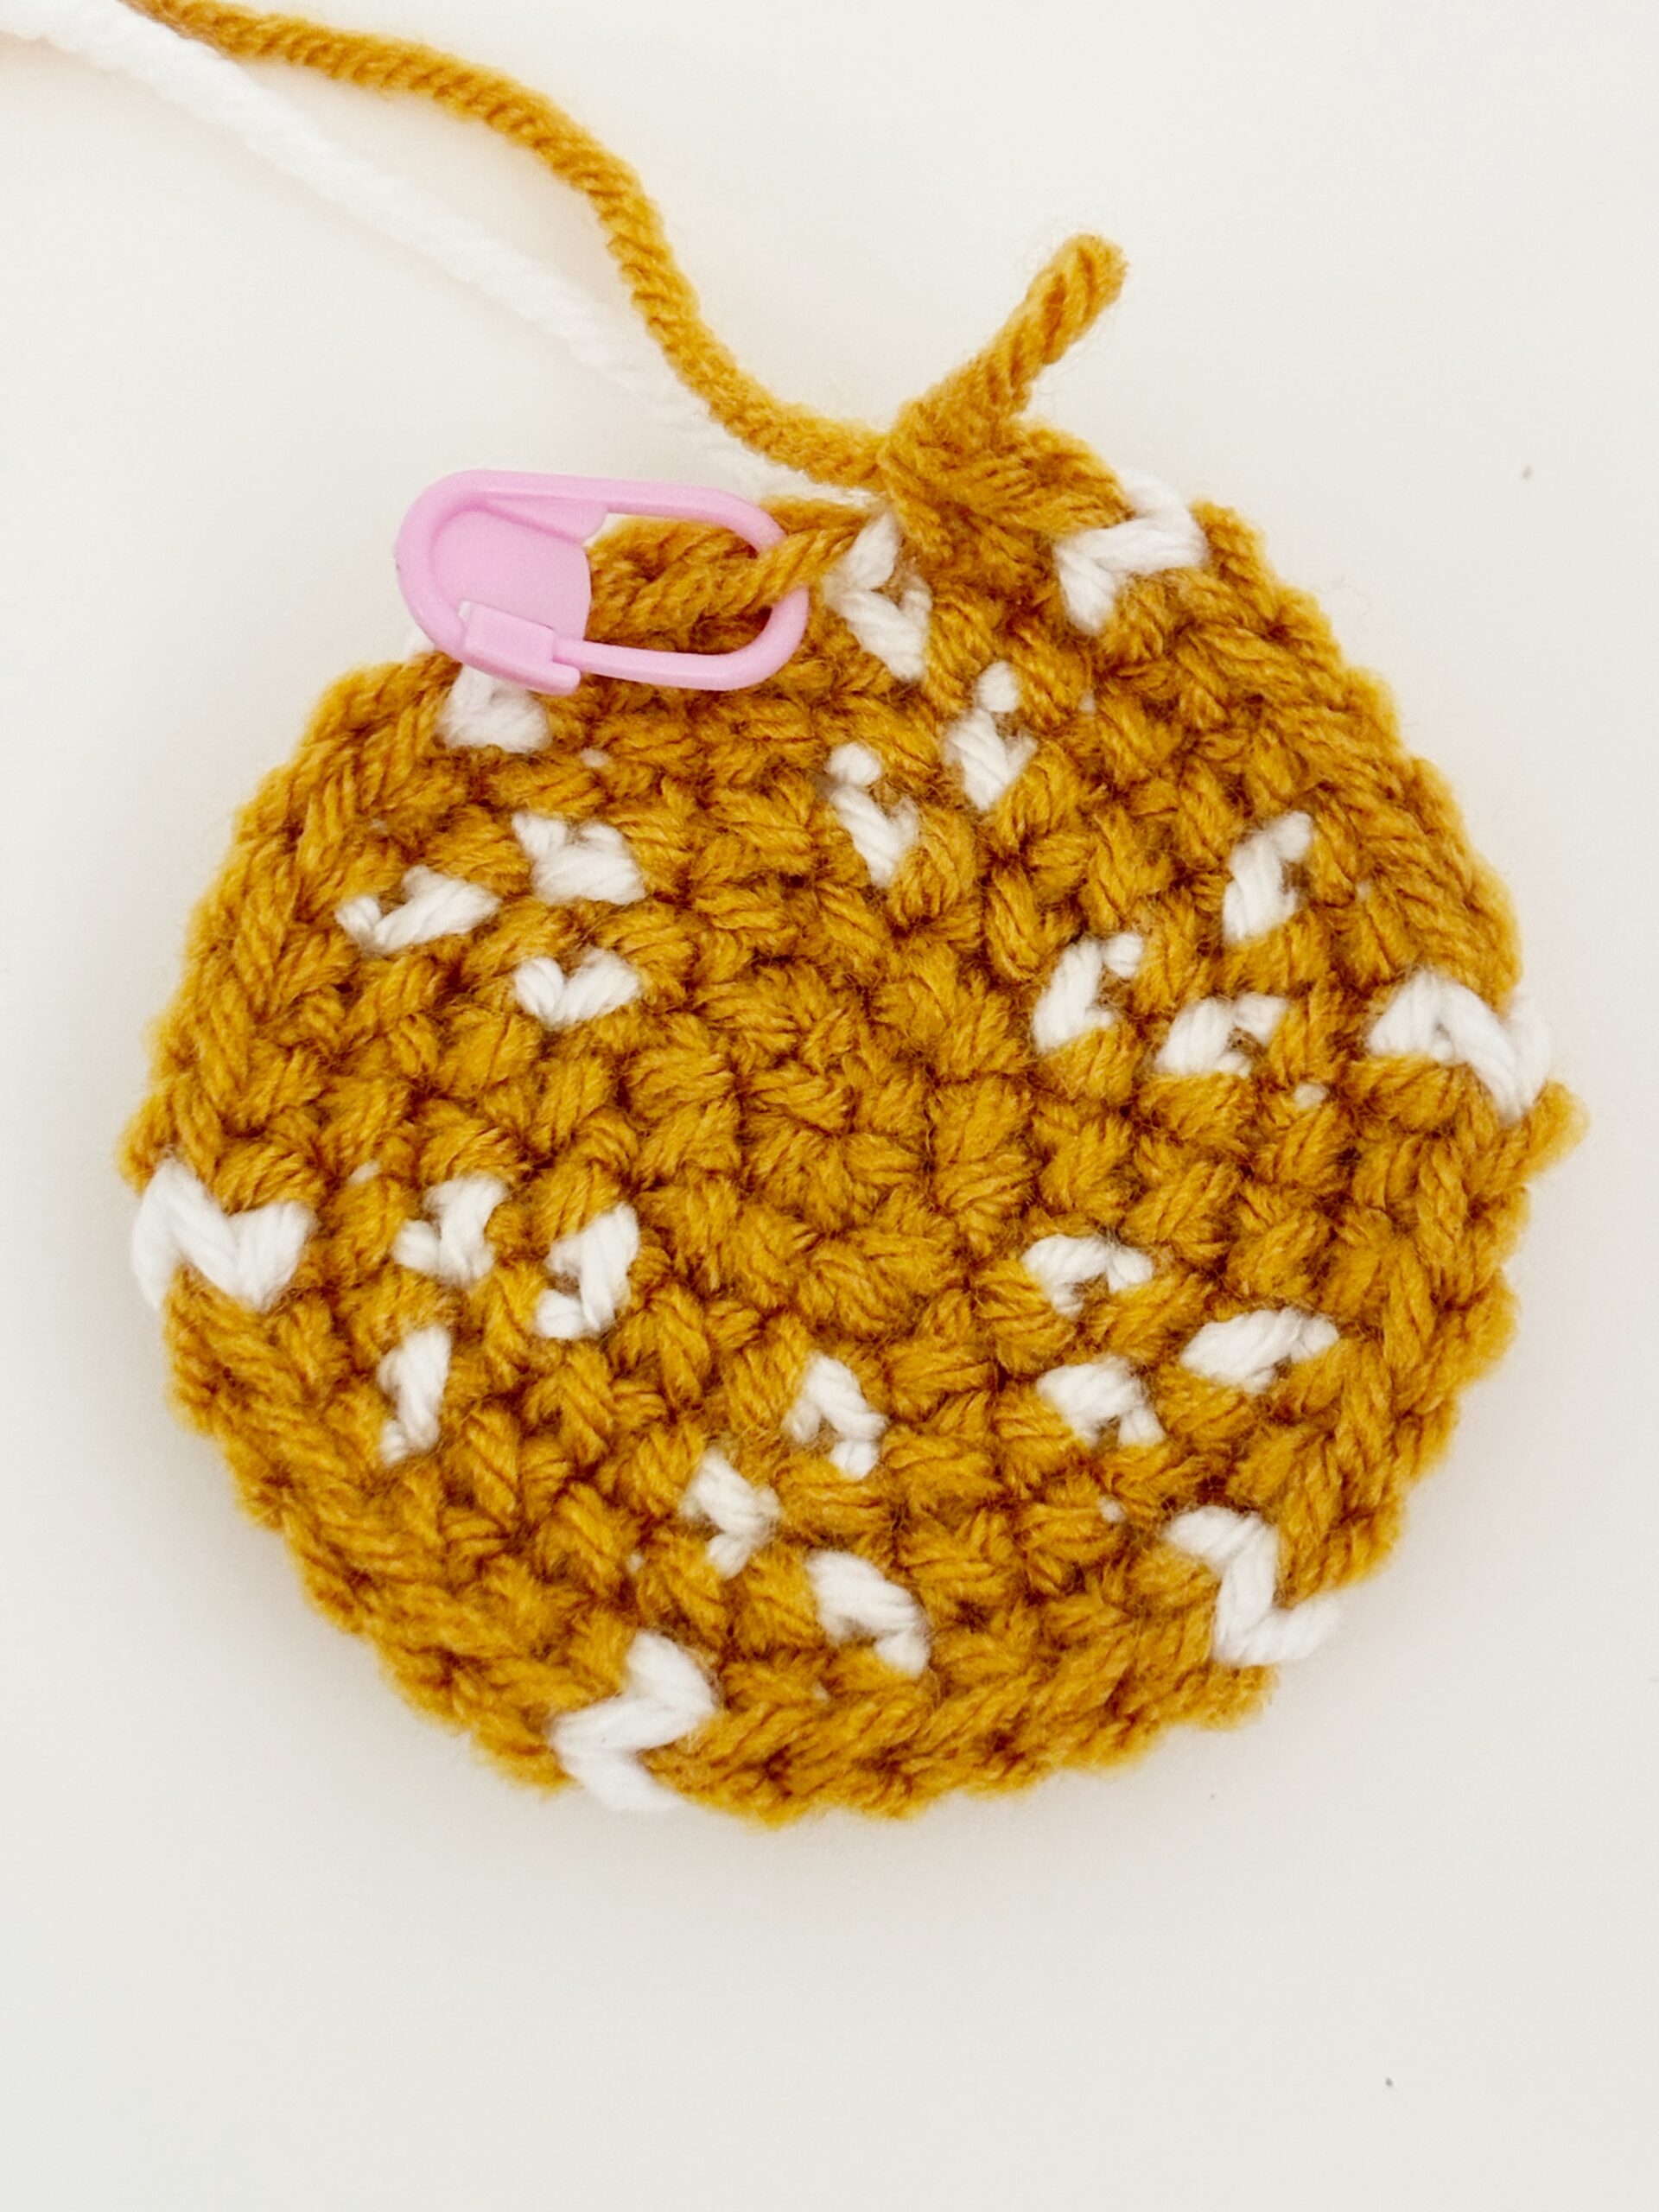 How to Crochet a Perfect Circle with Staggered Increases